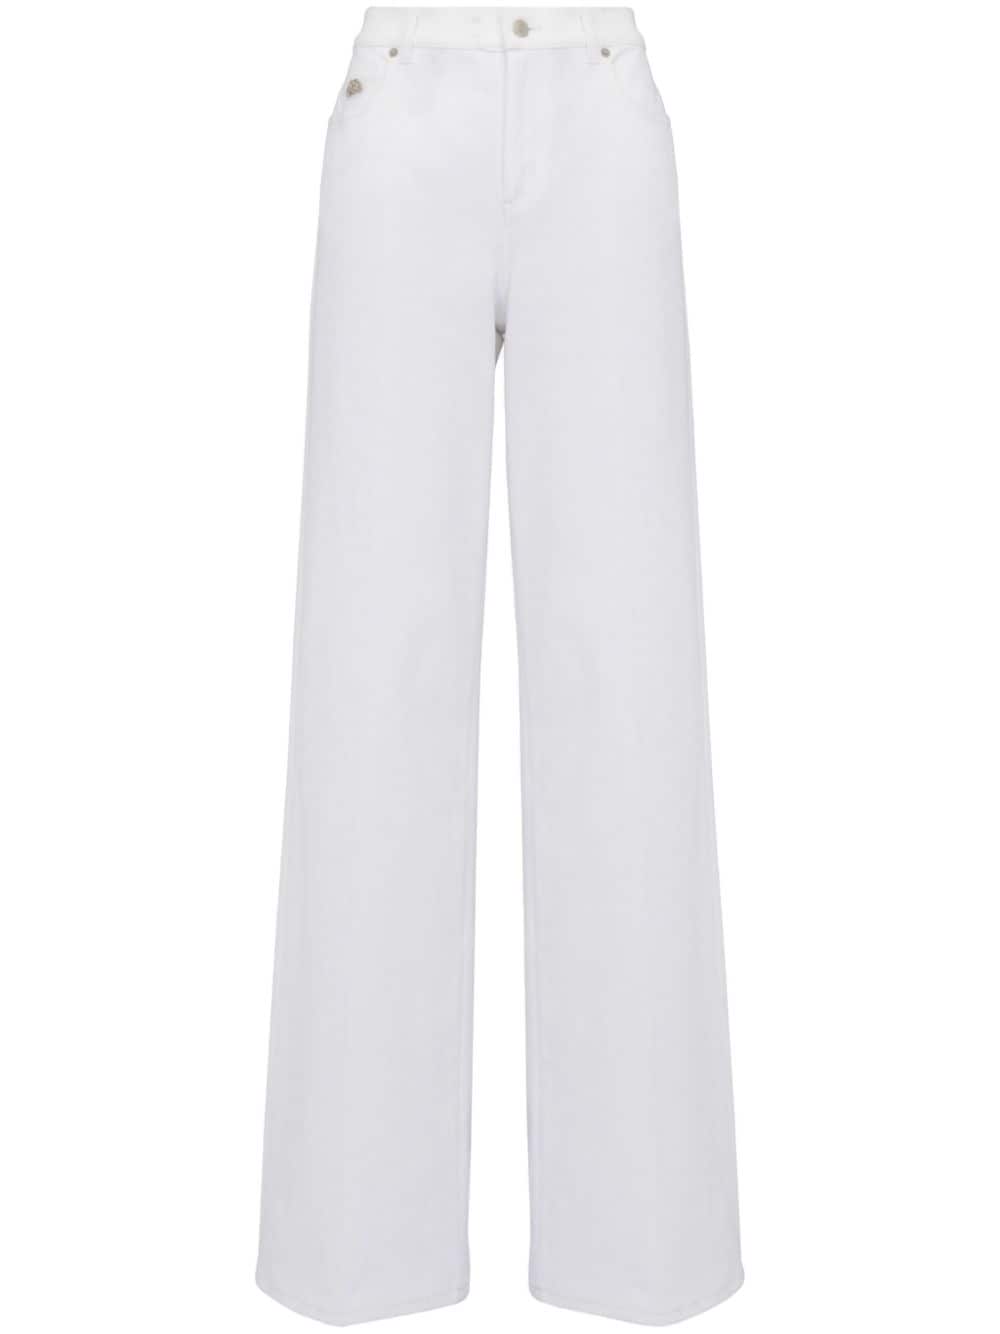 Mid-rise wide-leg jeans<BR/><BR/><BR/>